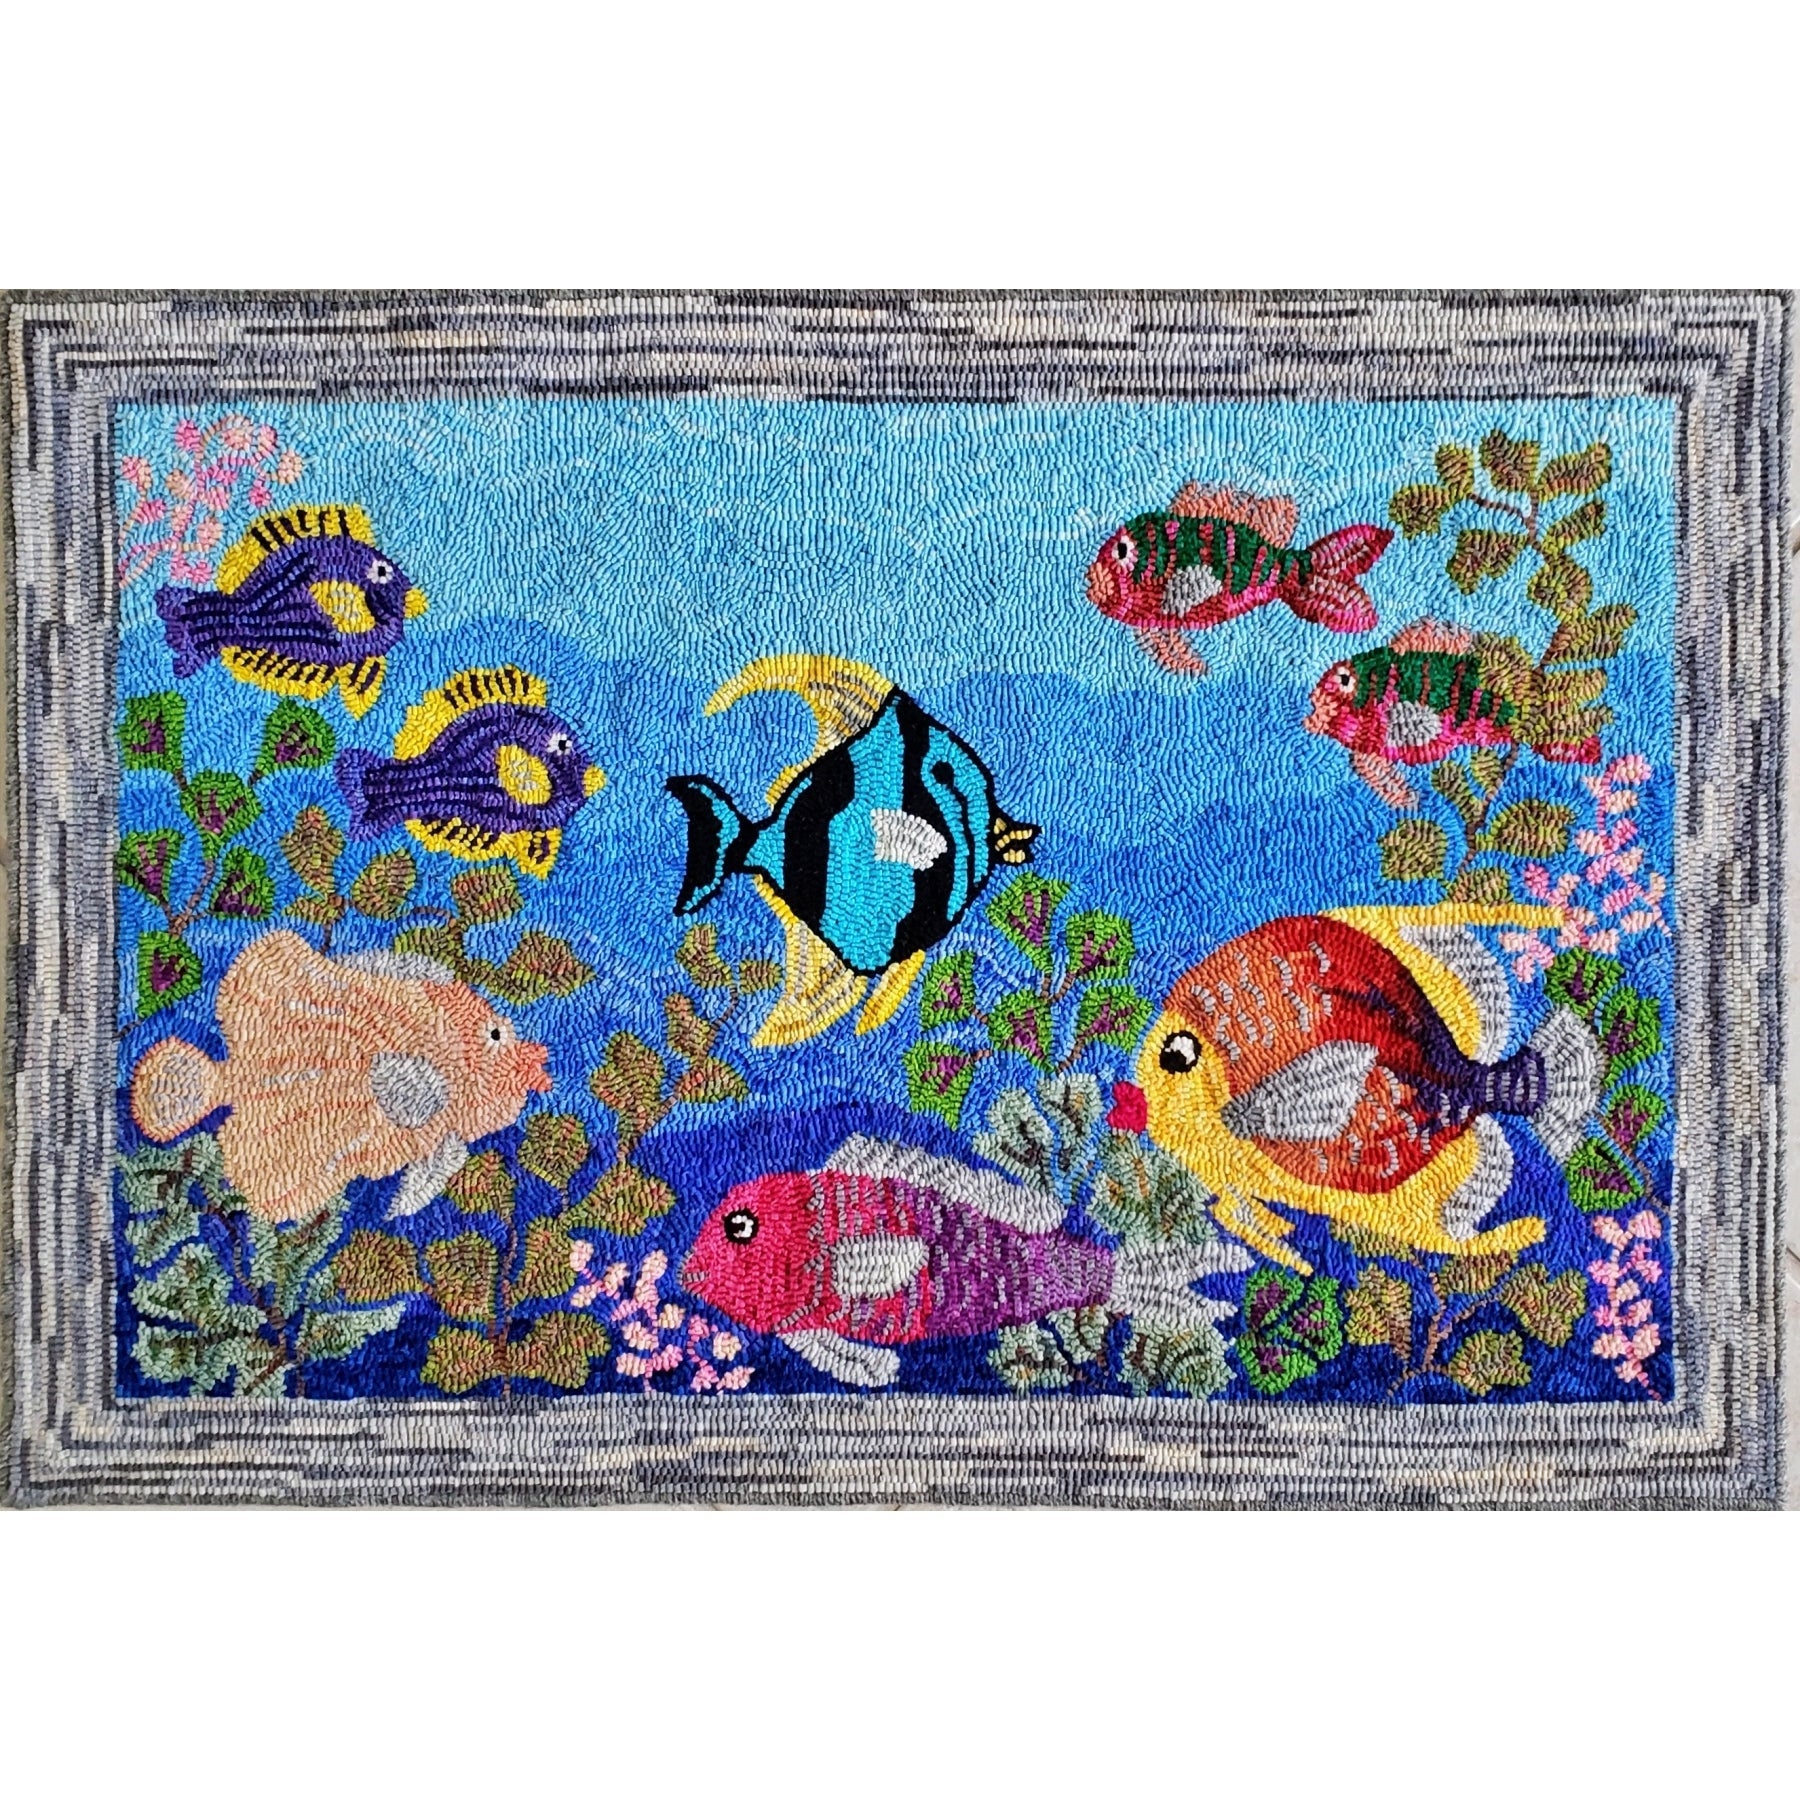 Coral Reef, rug hooked by Donna Martin